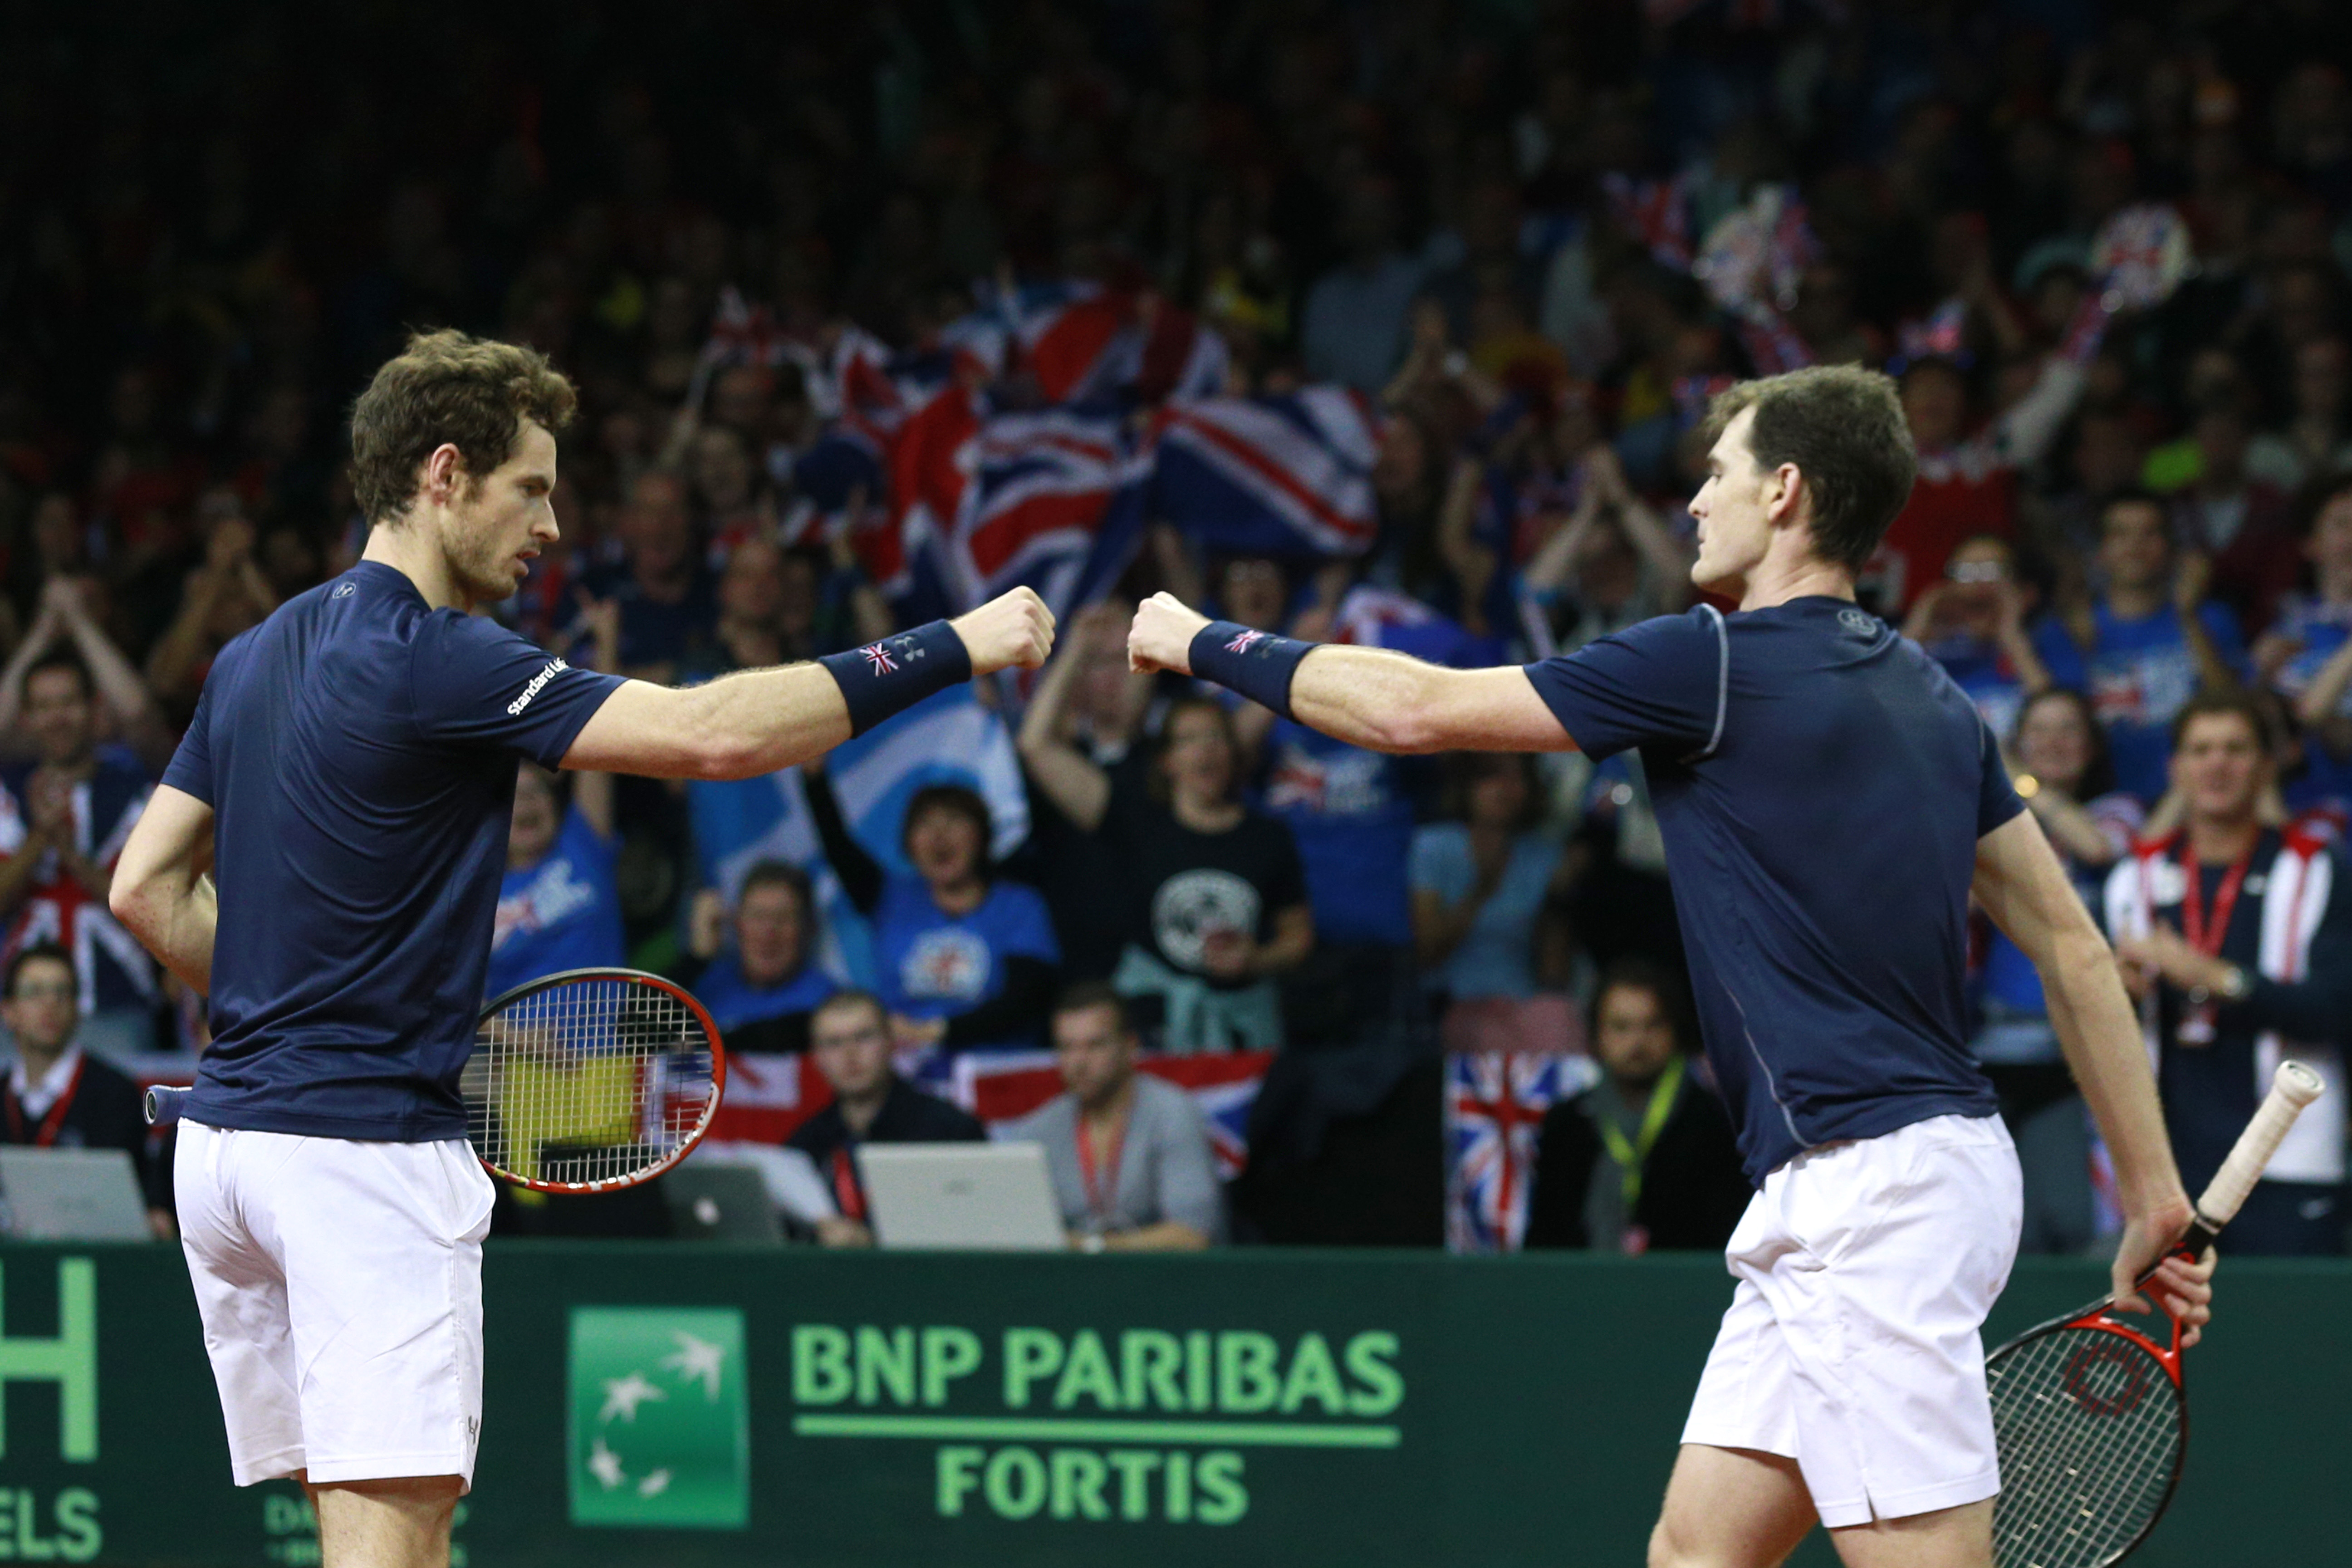 Tennis - Belgium v Great Britain - Davis Cup Final - Flanders Expo, Ghent, Belgium - 28/11/15 Men's Doubles - Great Britain's Andy Murray and Jamie Murray celebrate during their match against Belgium's Steve Darcis and David Goffin Action Images via Reuters / Jason Cairnduff Livepic